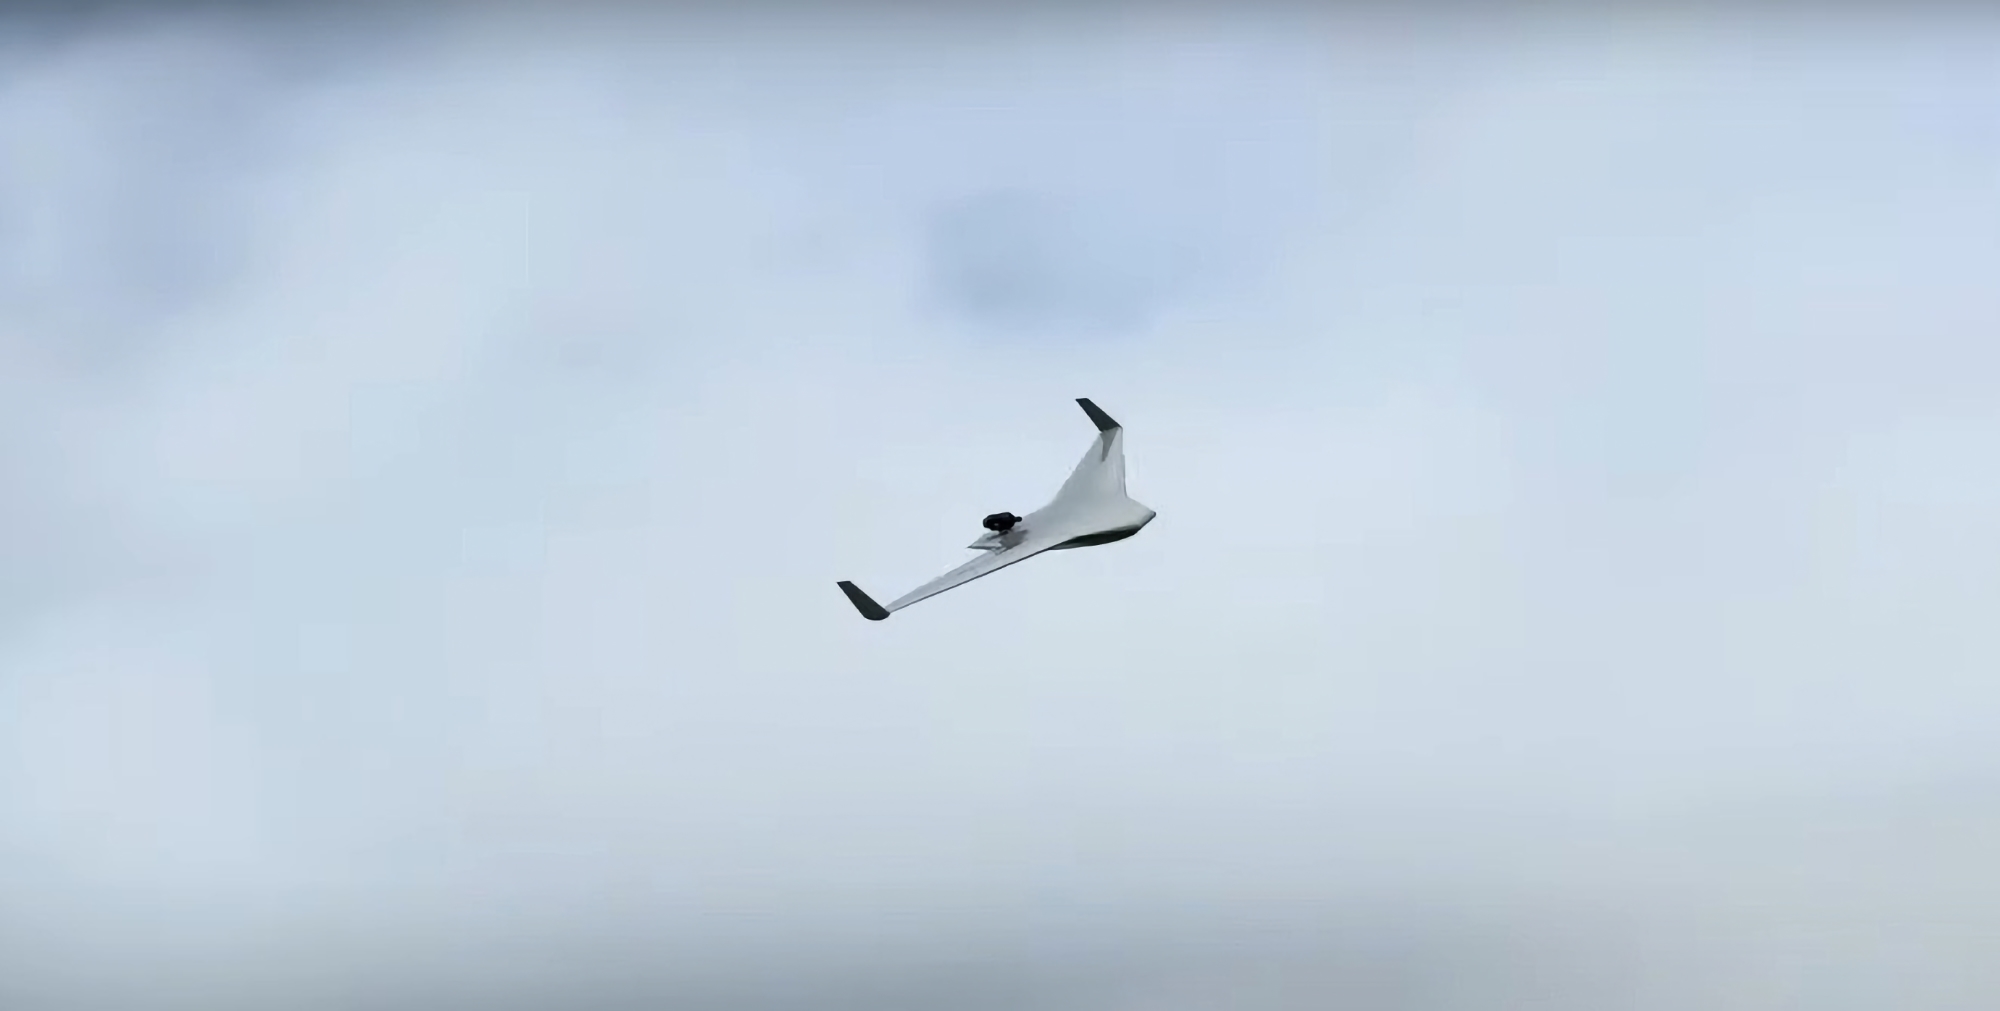 EOS Technologie has unveiled the Veloce 330: a jet-powered UAV with vertical take-off and landing technology that can reach speeds of up to 400 km/h